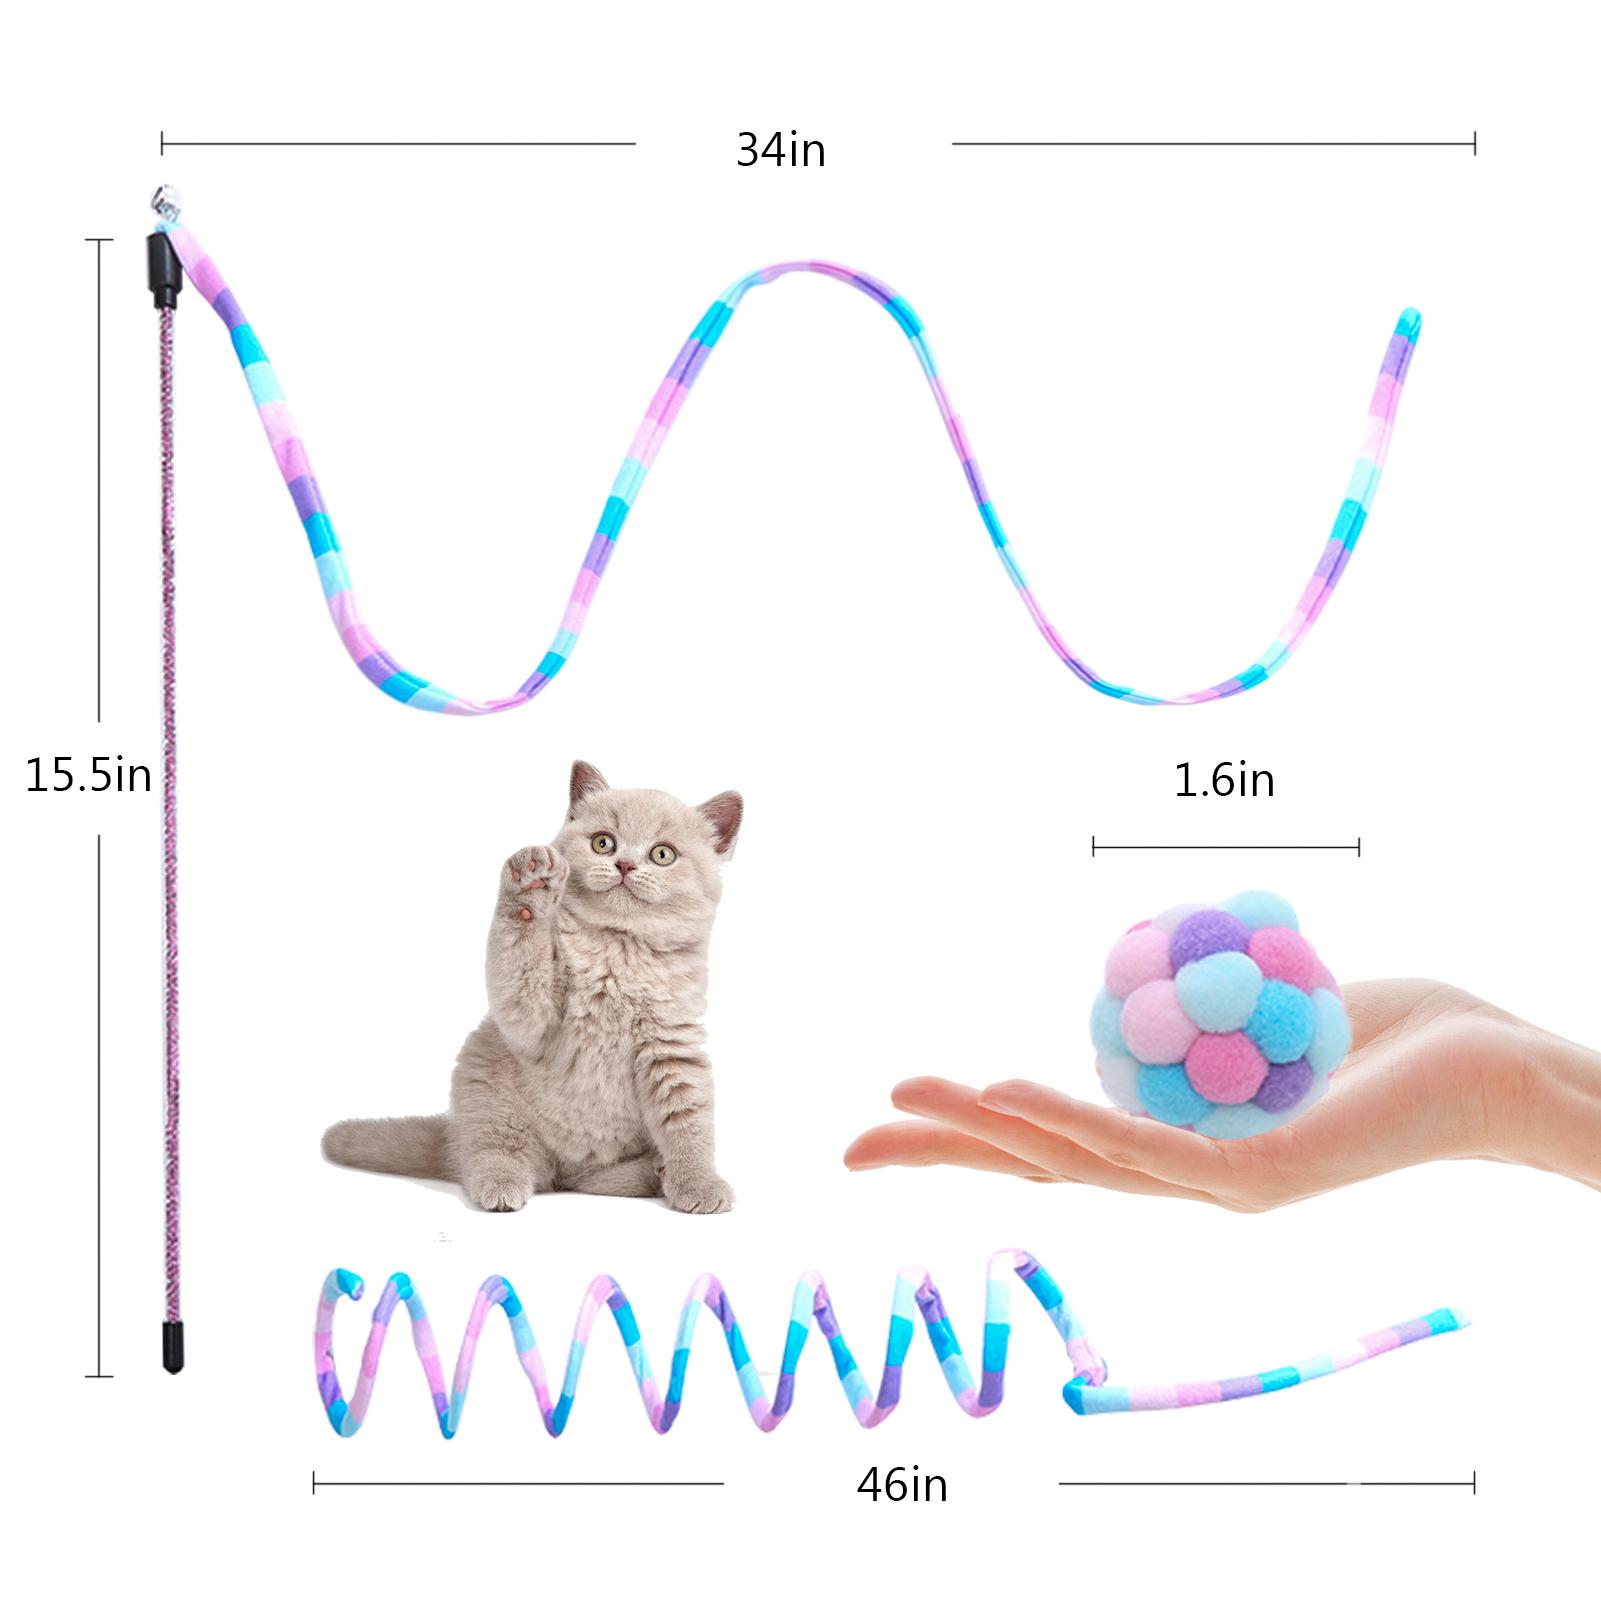 Cat Toys for Indoor Cat,Cat Rainbow Wand Toys Cat Fuzzy Balls with Bell,Interactive Cat Toy Cat Spring for Kitten,Puppy Chase Exercise-3 Pack